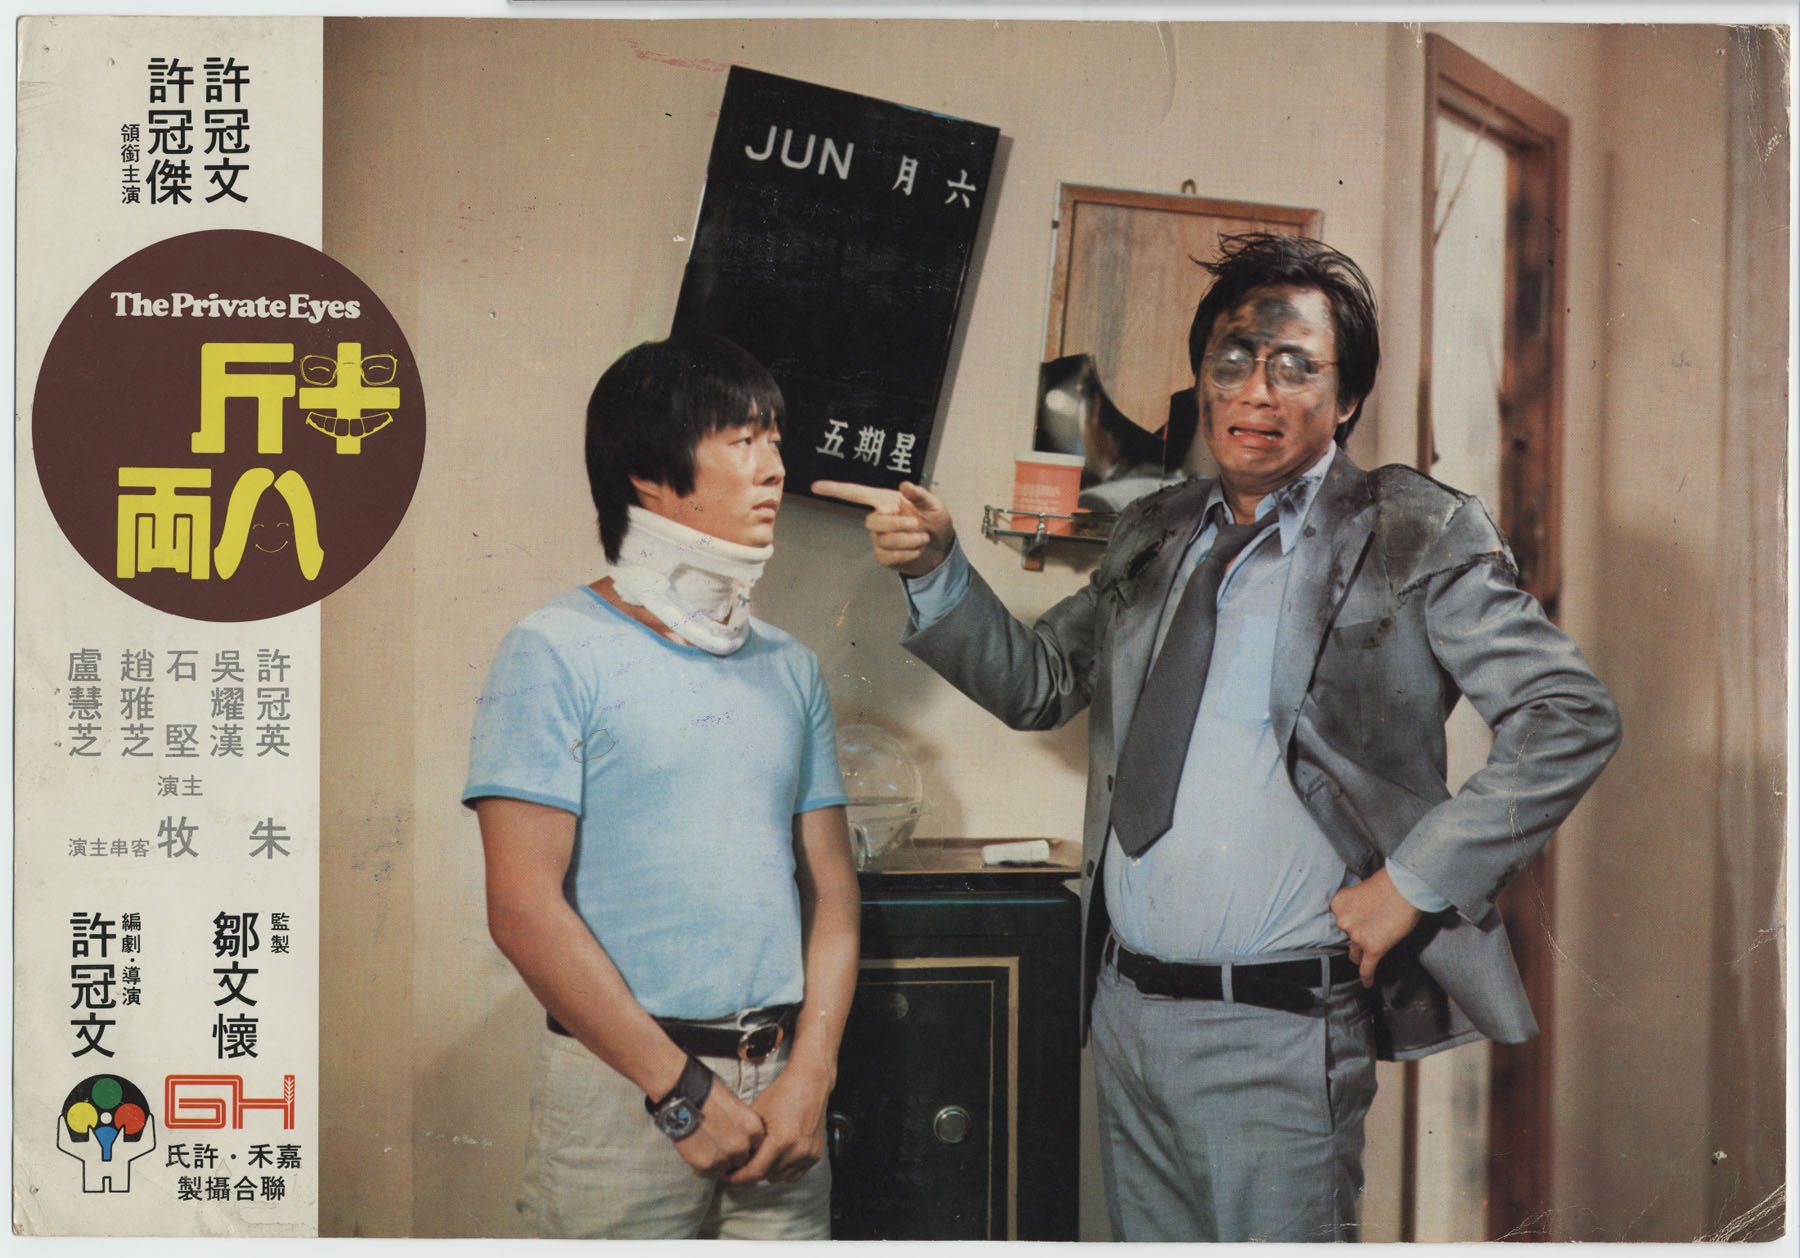 Hong Kong comedy legend Michael Hui was part of the resurgence of Cantonese cinema in the 1970s, with films including The Private Eyes (above), Security Unlimited and The Contract. 